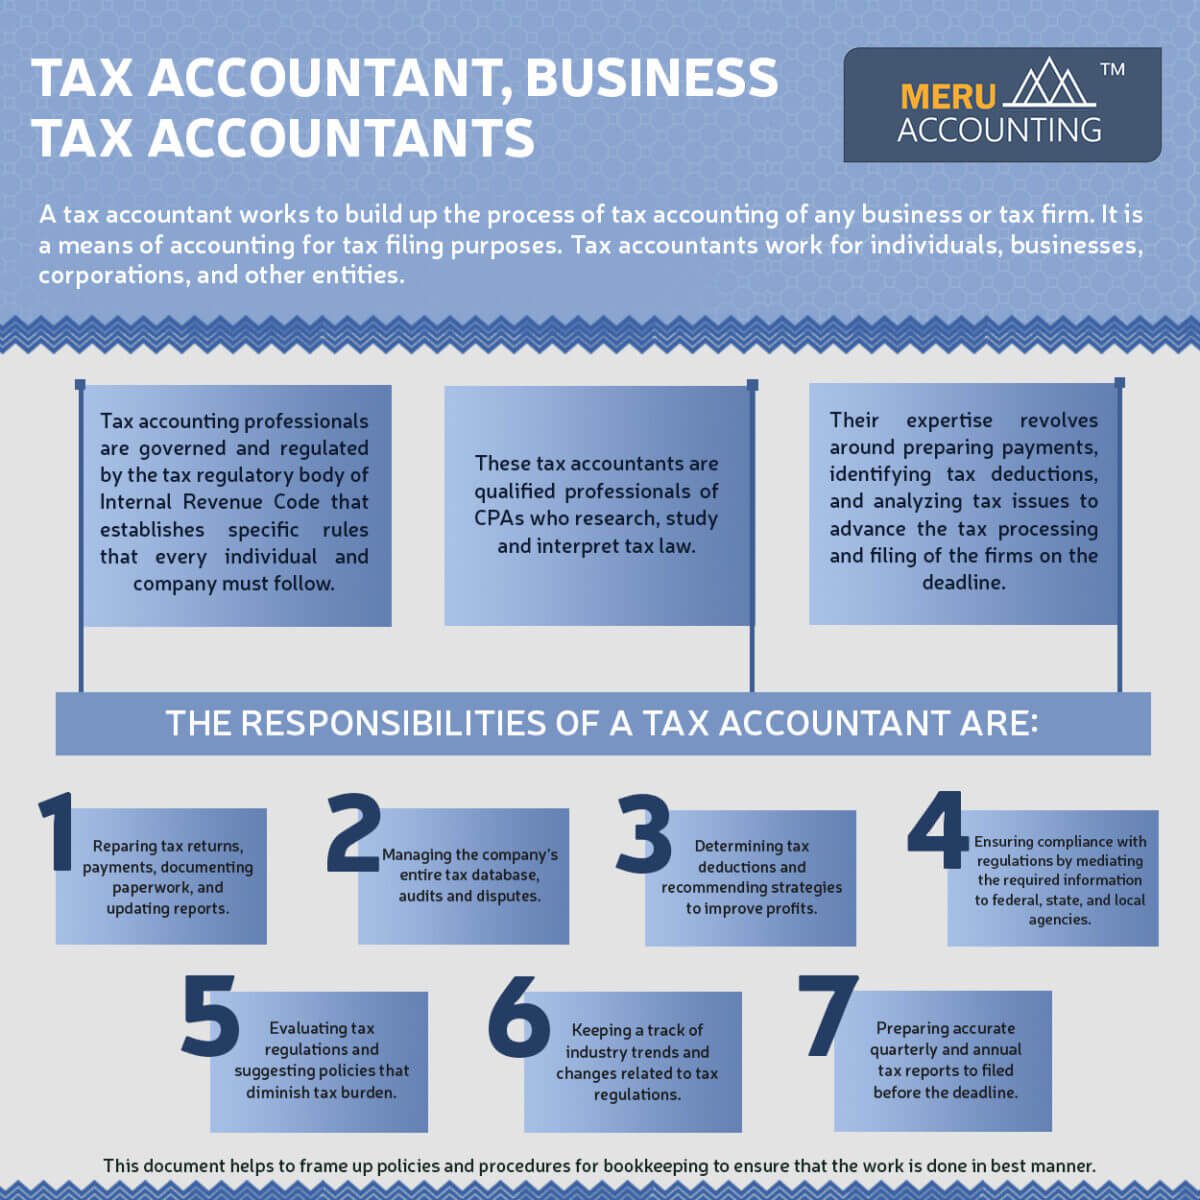 What is the role of Business Tax Accountants?